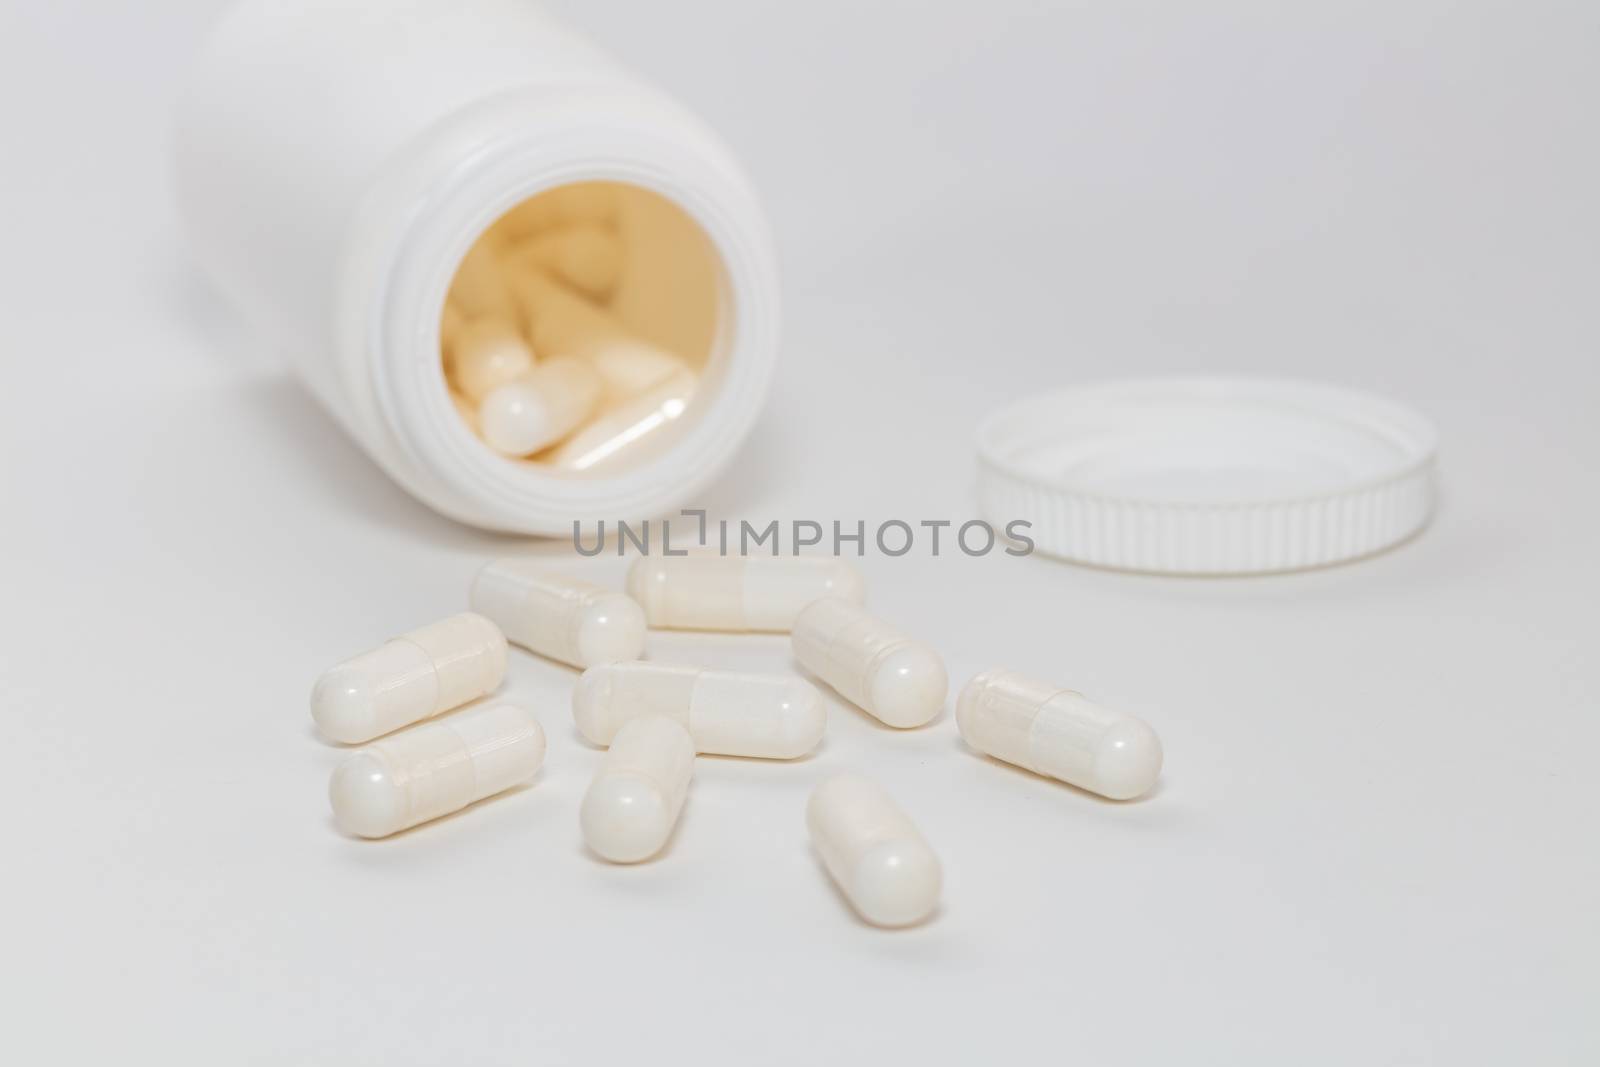 Bunch of white scattered pills on white background. White pills container and cap next to them slightly out of focus in the background. Close up. Pharmaceutical business and medicine sale concepts. by DamantisZ